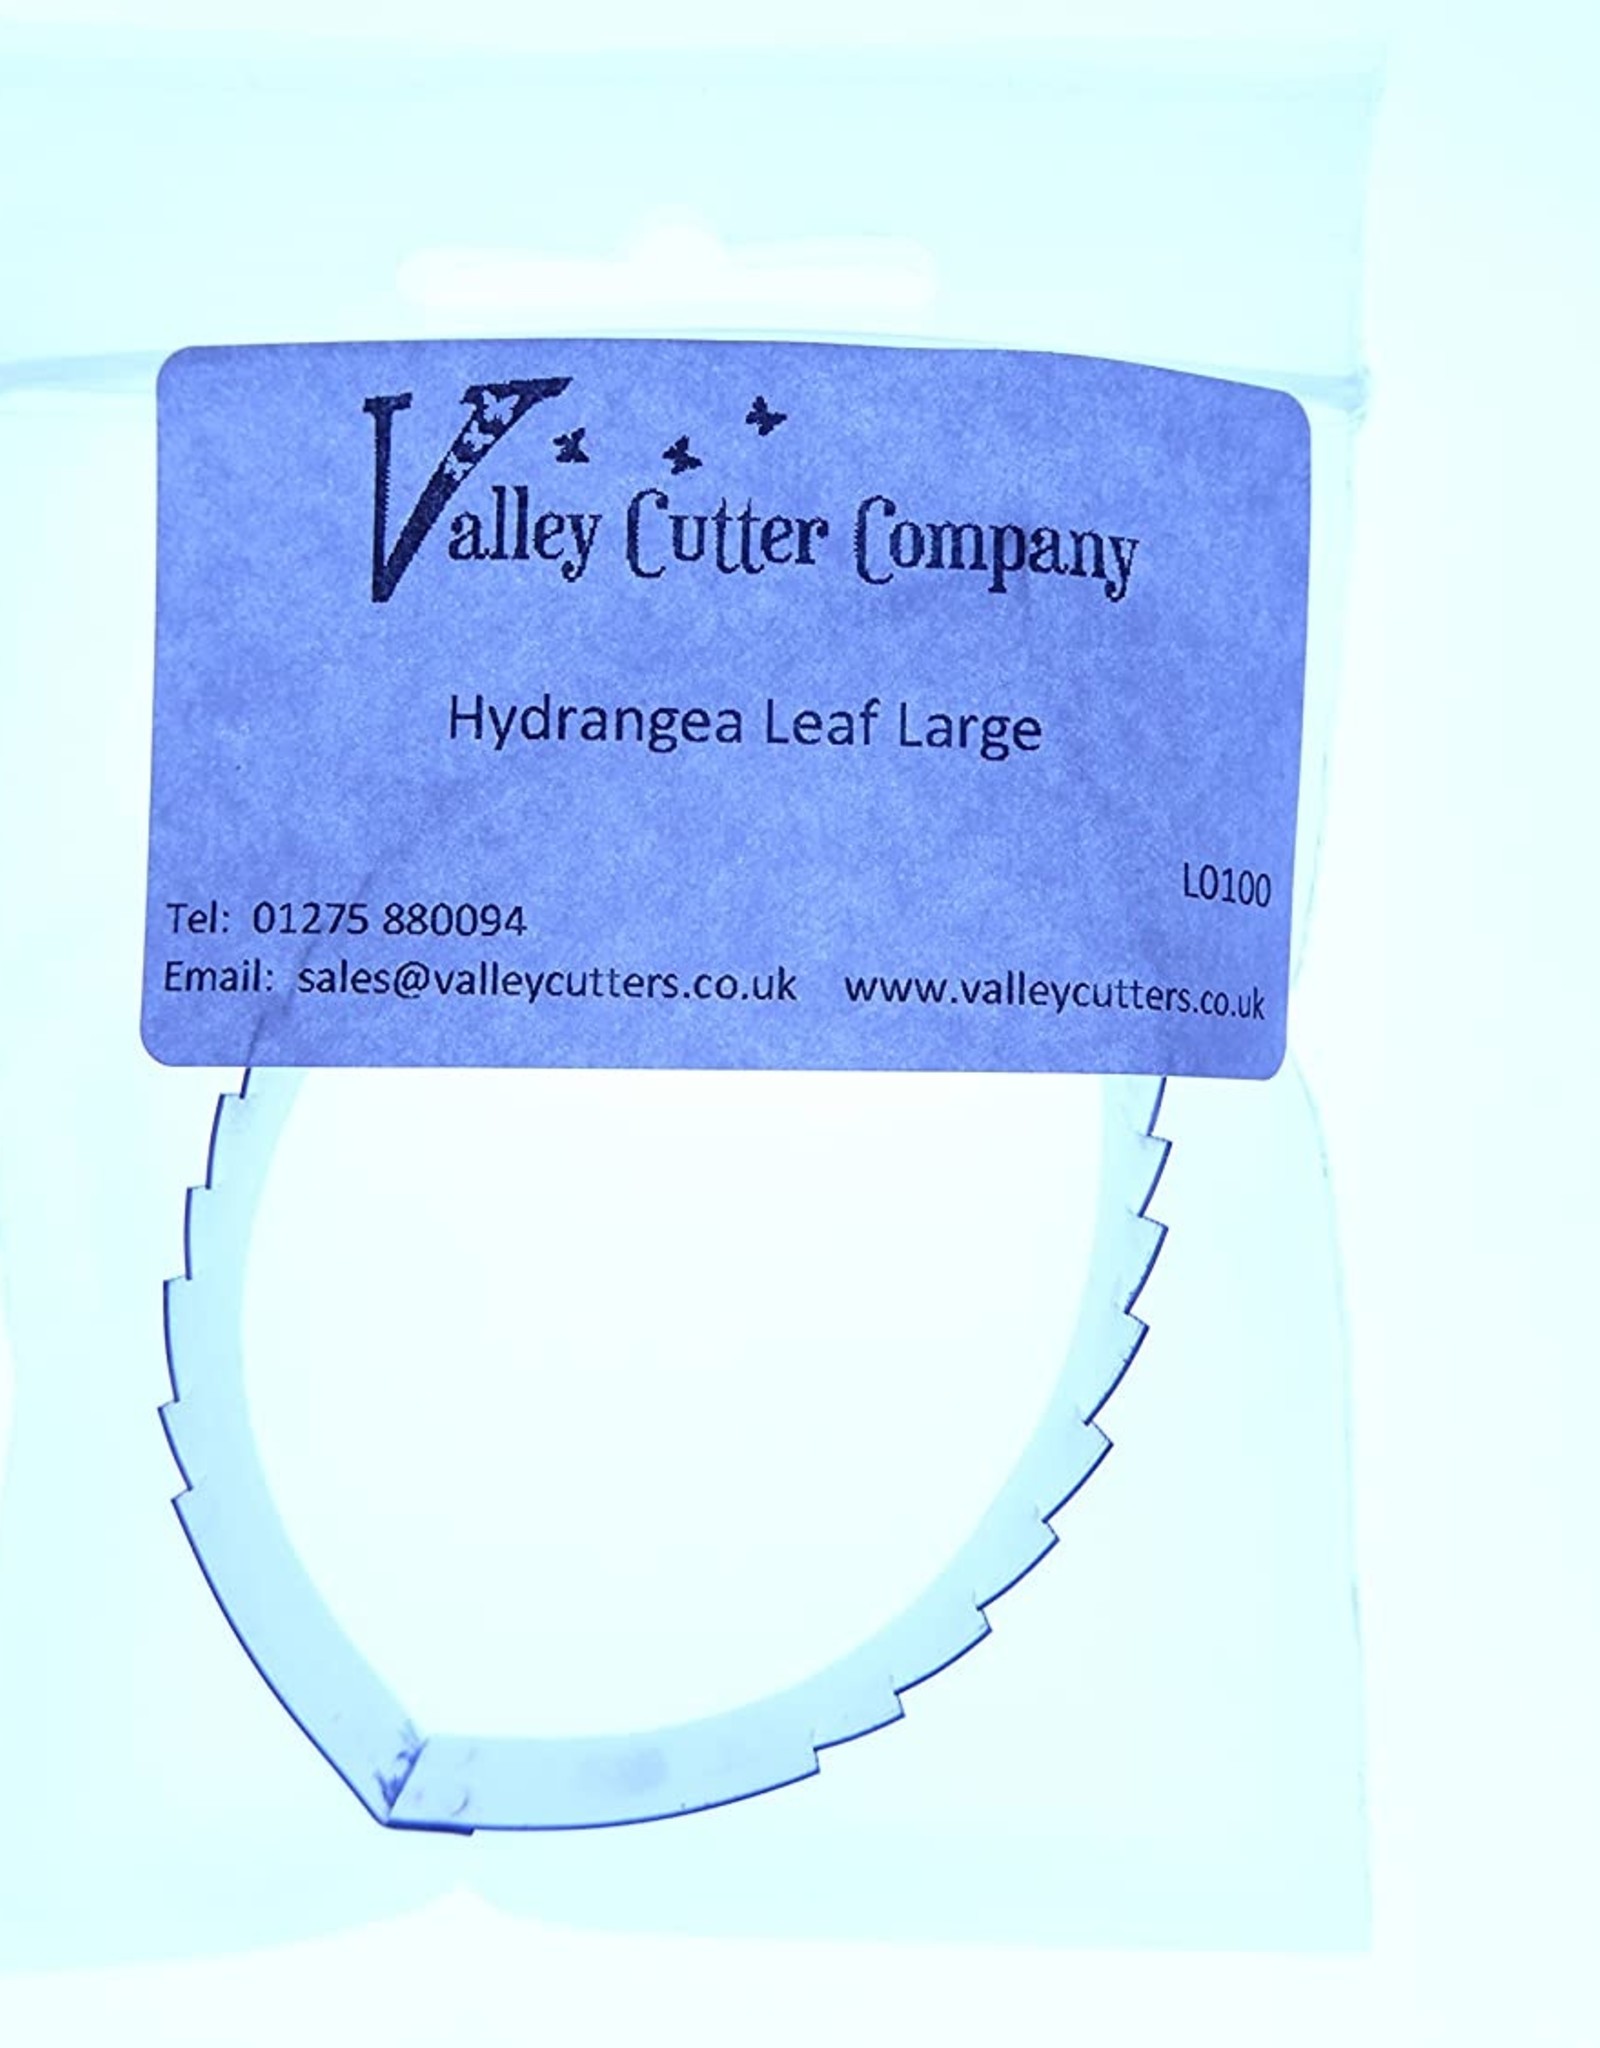 Valley Cutter Company Hydrangea Leaf Cutter Large